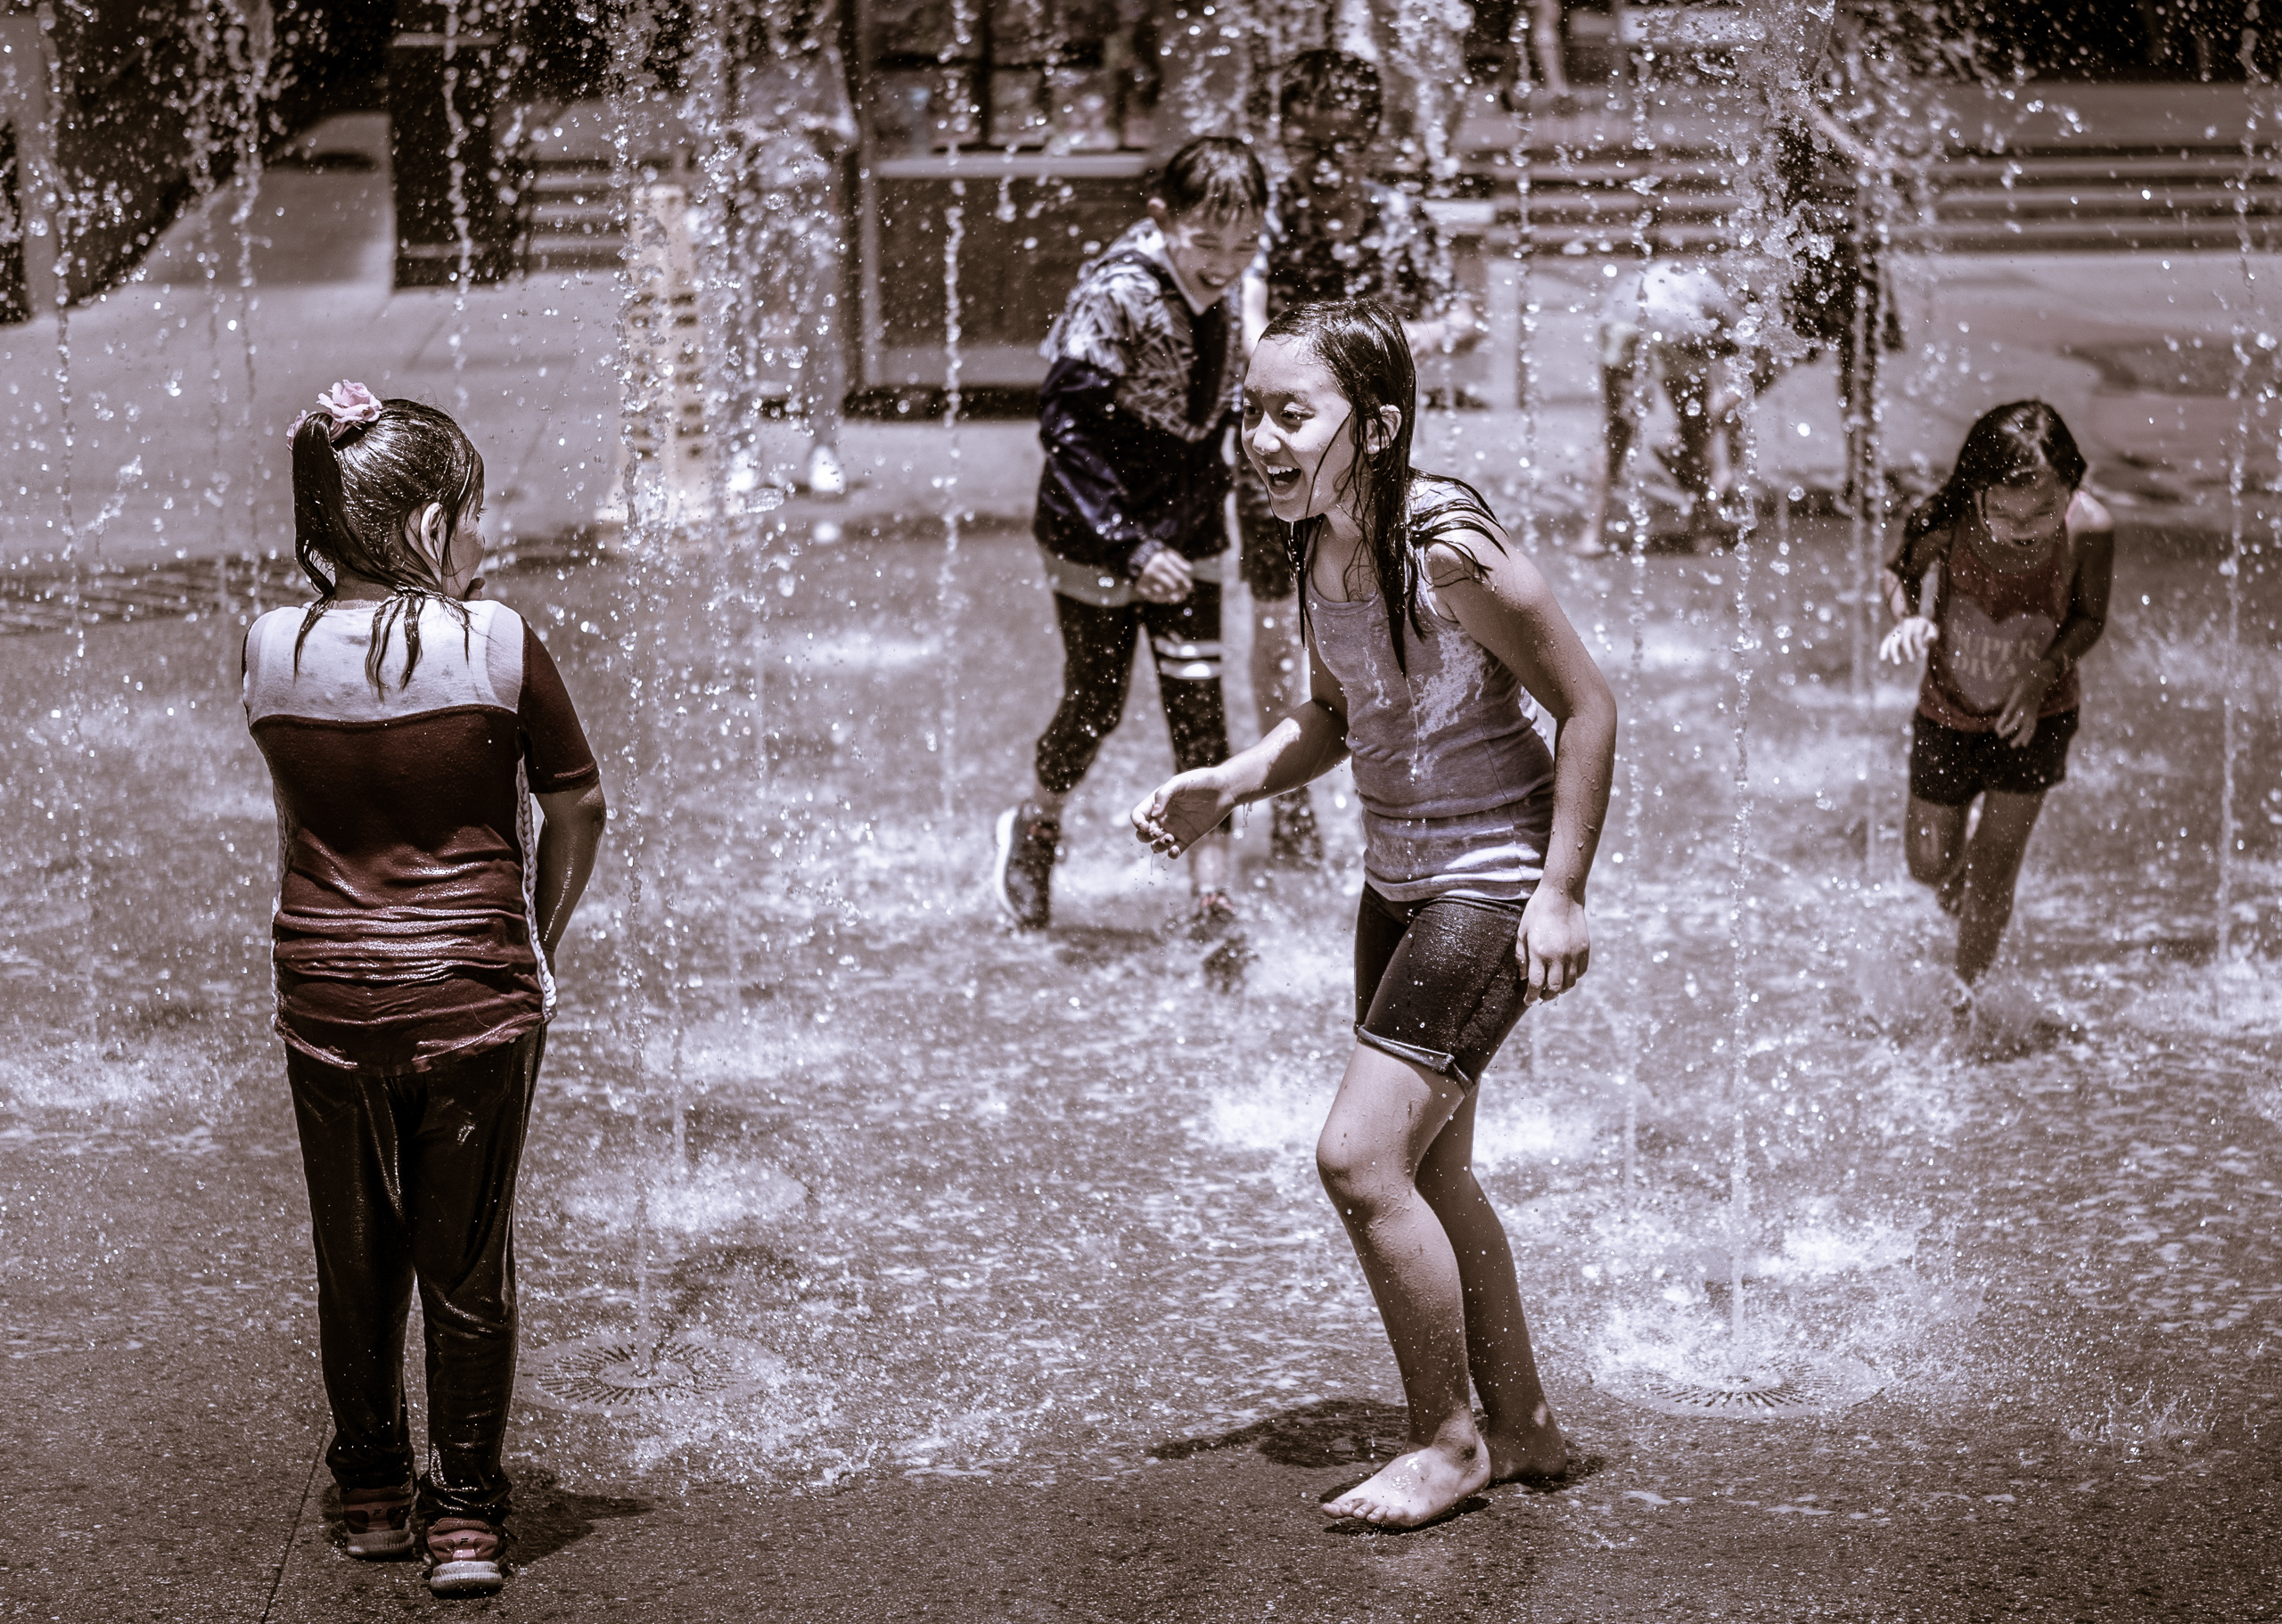 Kids joyously playing in the fountain at the Hollywood & Highland Center on a very hot, 100°F+ day in Los Angeles